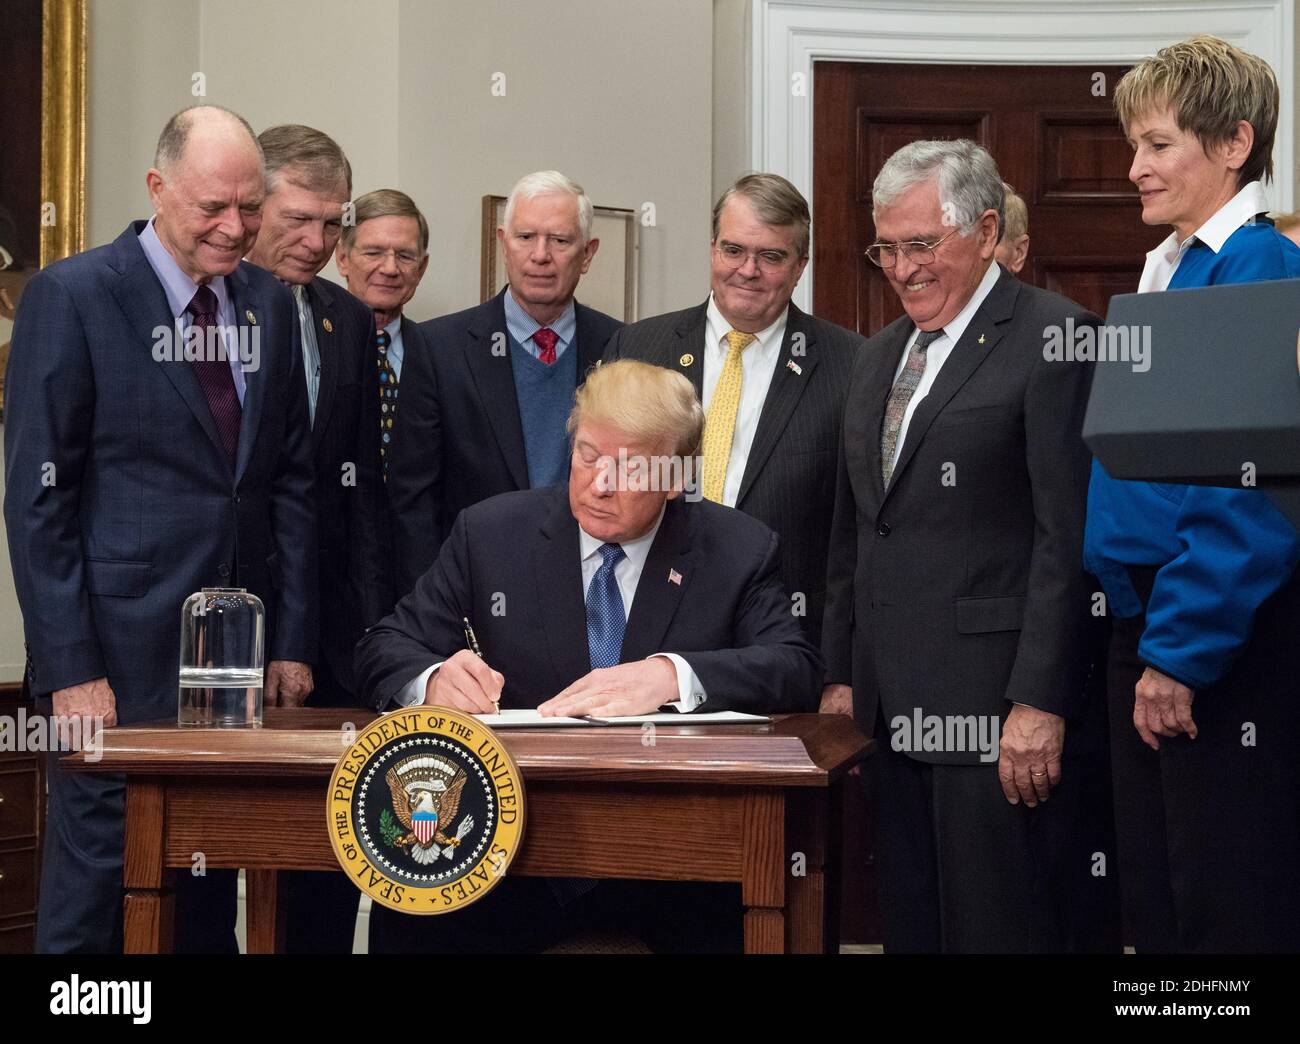 United States President Donald J. Trump signs the Presidential Space Directive - 1, directing NASA to return to the moon, alongside members of the Senate, Congress, NASA, and commercial space companies in the Roosevelt room of the White House in Washington, Monday, December 11, 2017. Mandatory Credit: Aubrey Gemignani / NASA via CNP /ABACAPRESS.COM Stock Photo